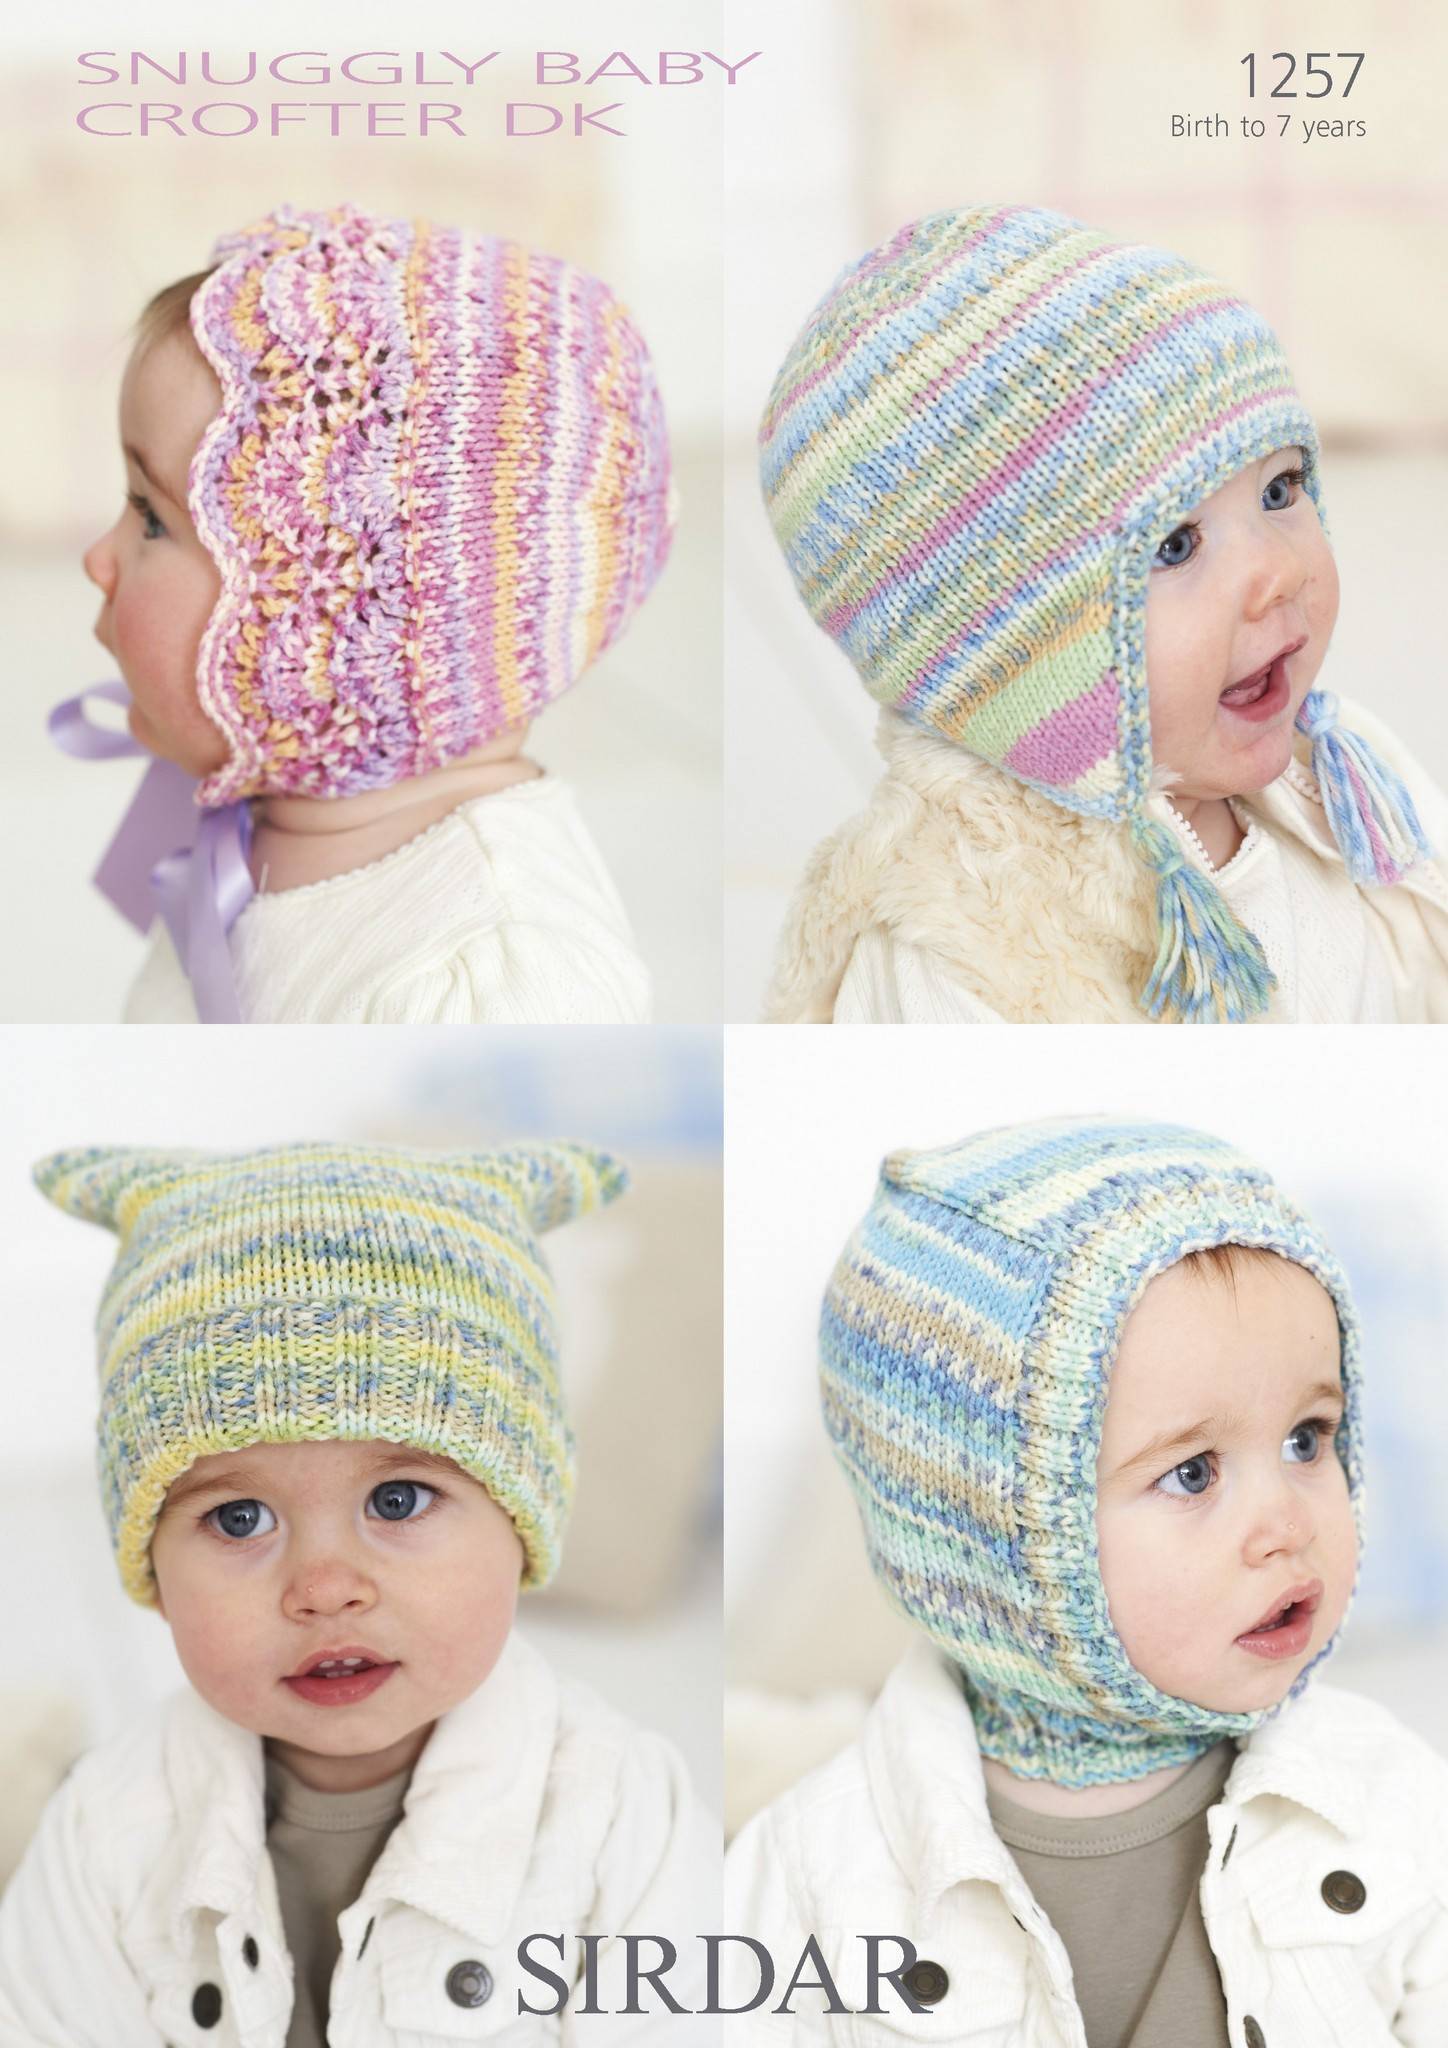 Hats in Sirdar Snuggly Baby Crofter DK (1257) | The Knitting Network